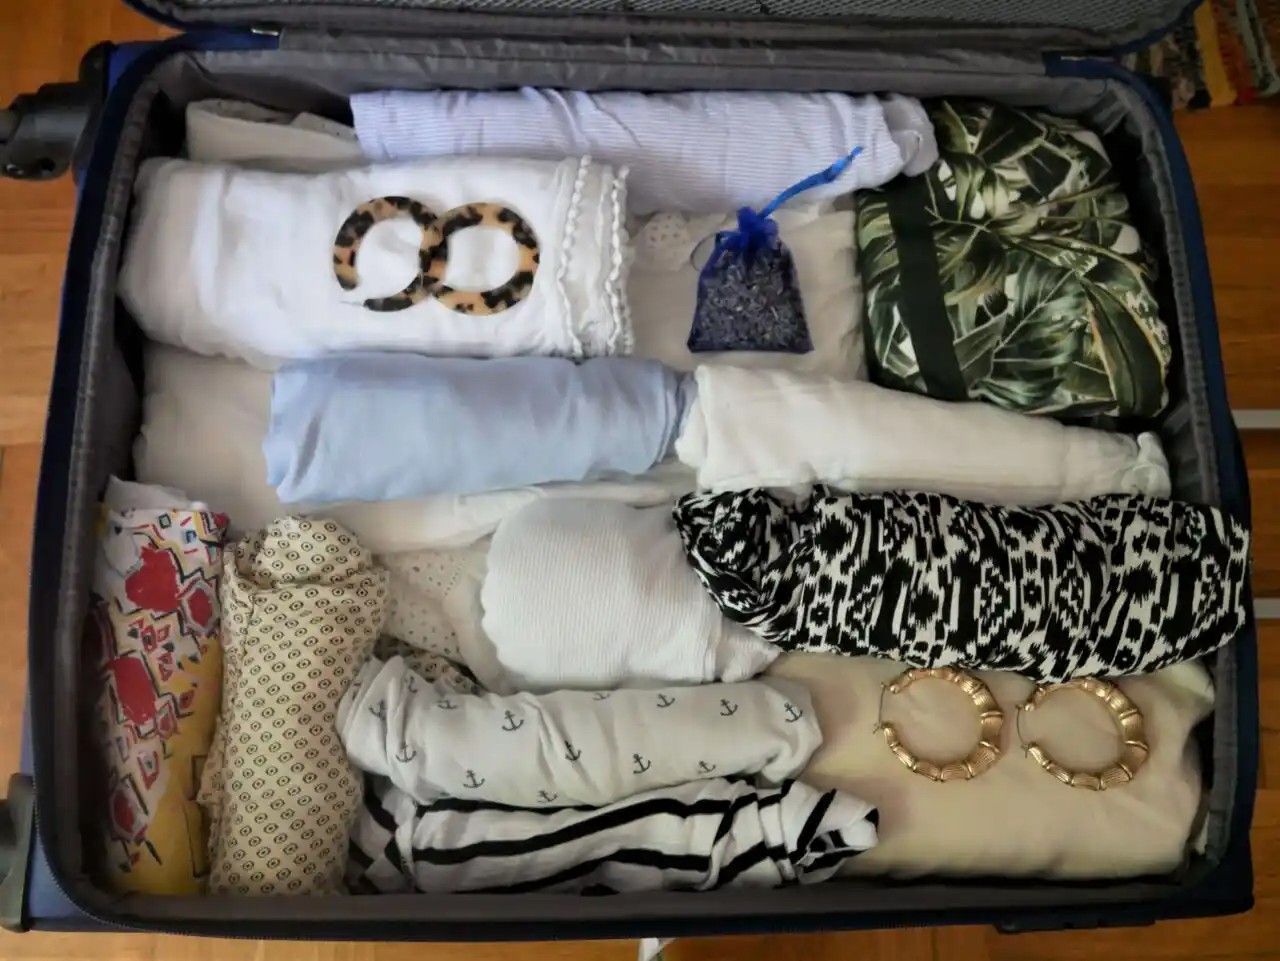 Rolling-the-clothes-inside-the-suitcase